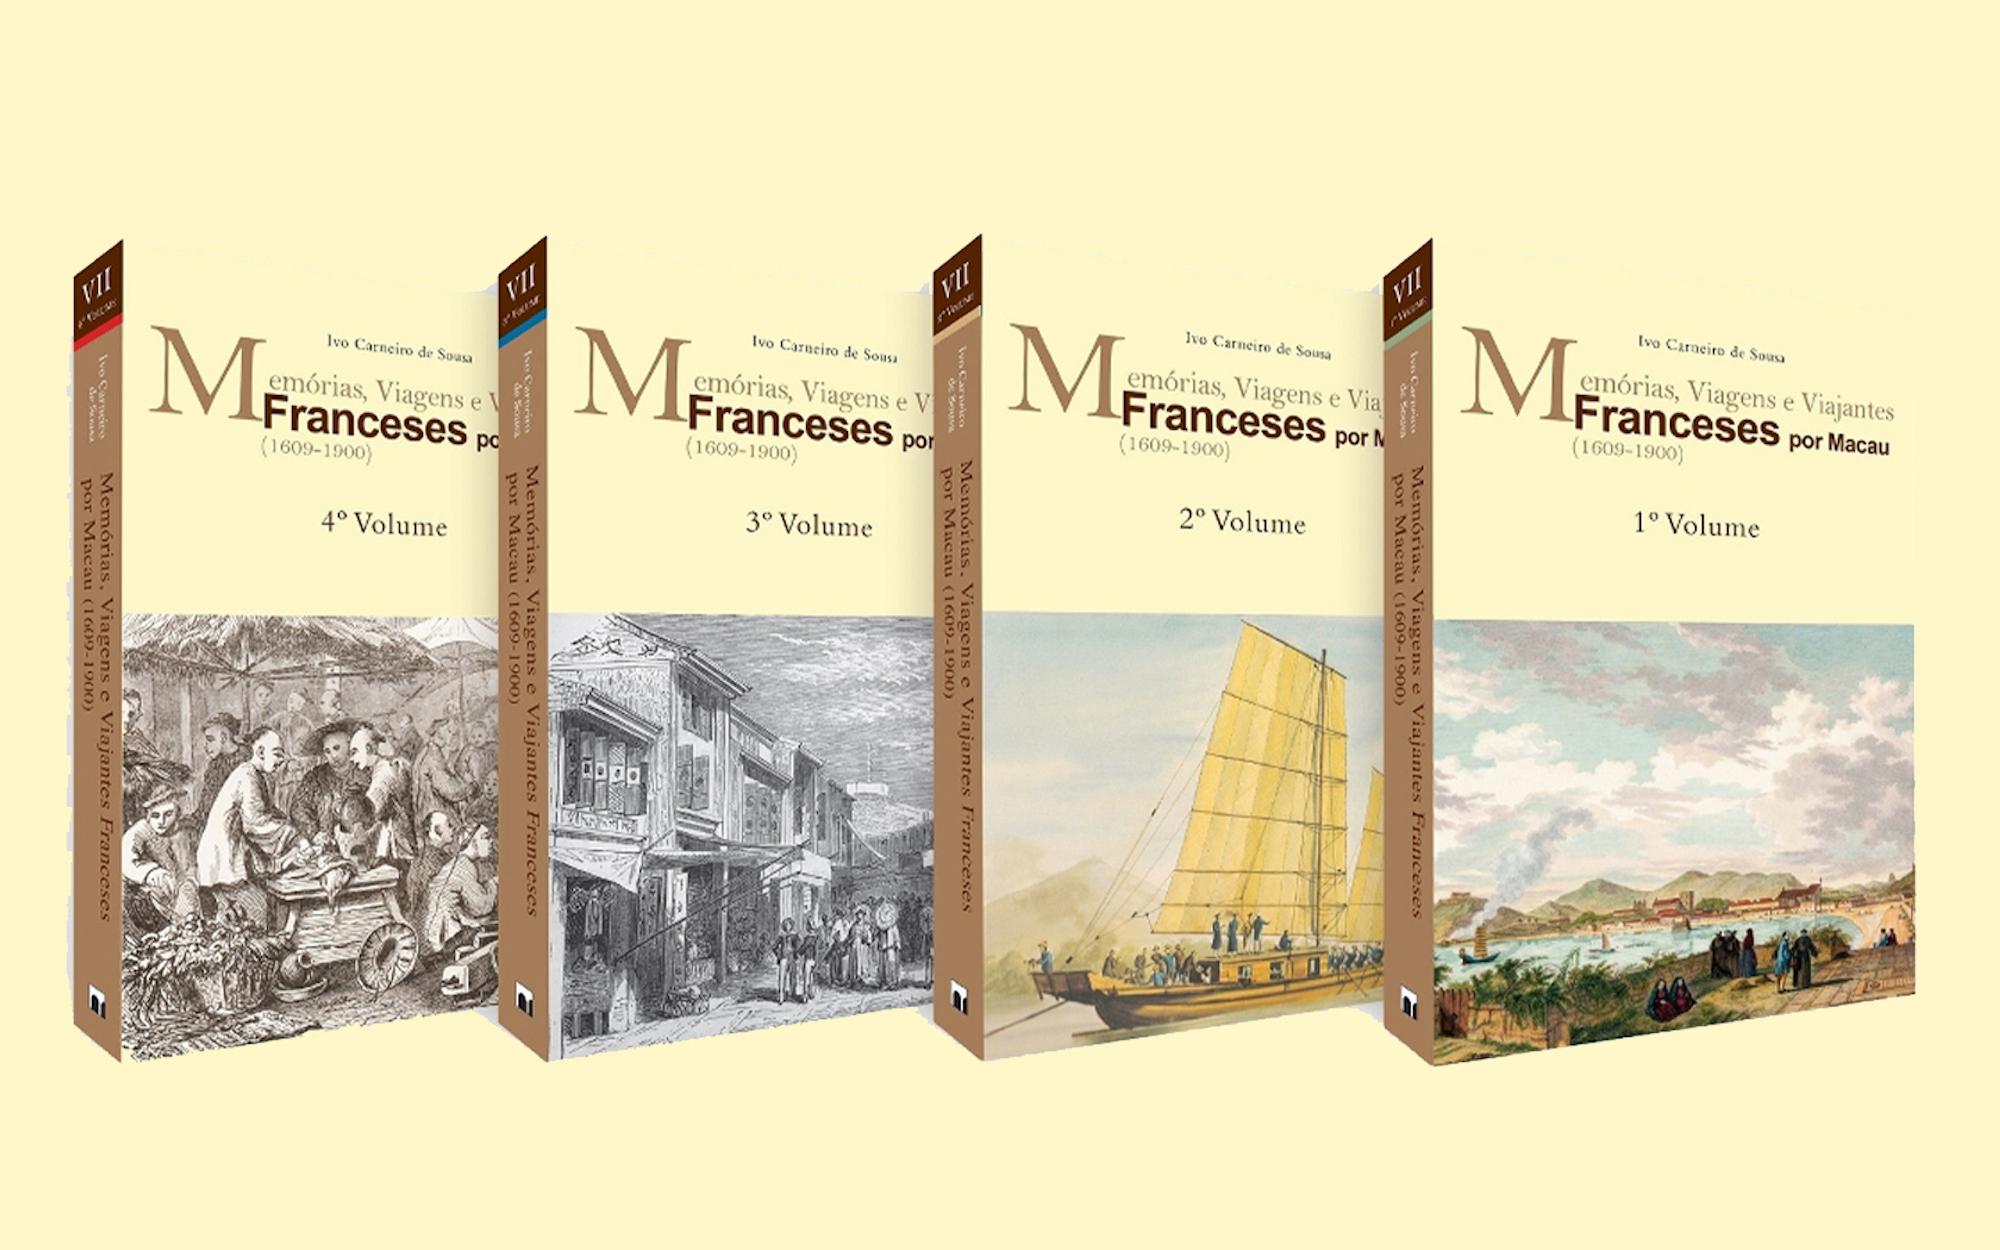 New book of French travellers’ experiences illuminates Macao’s history